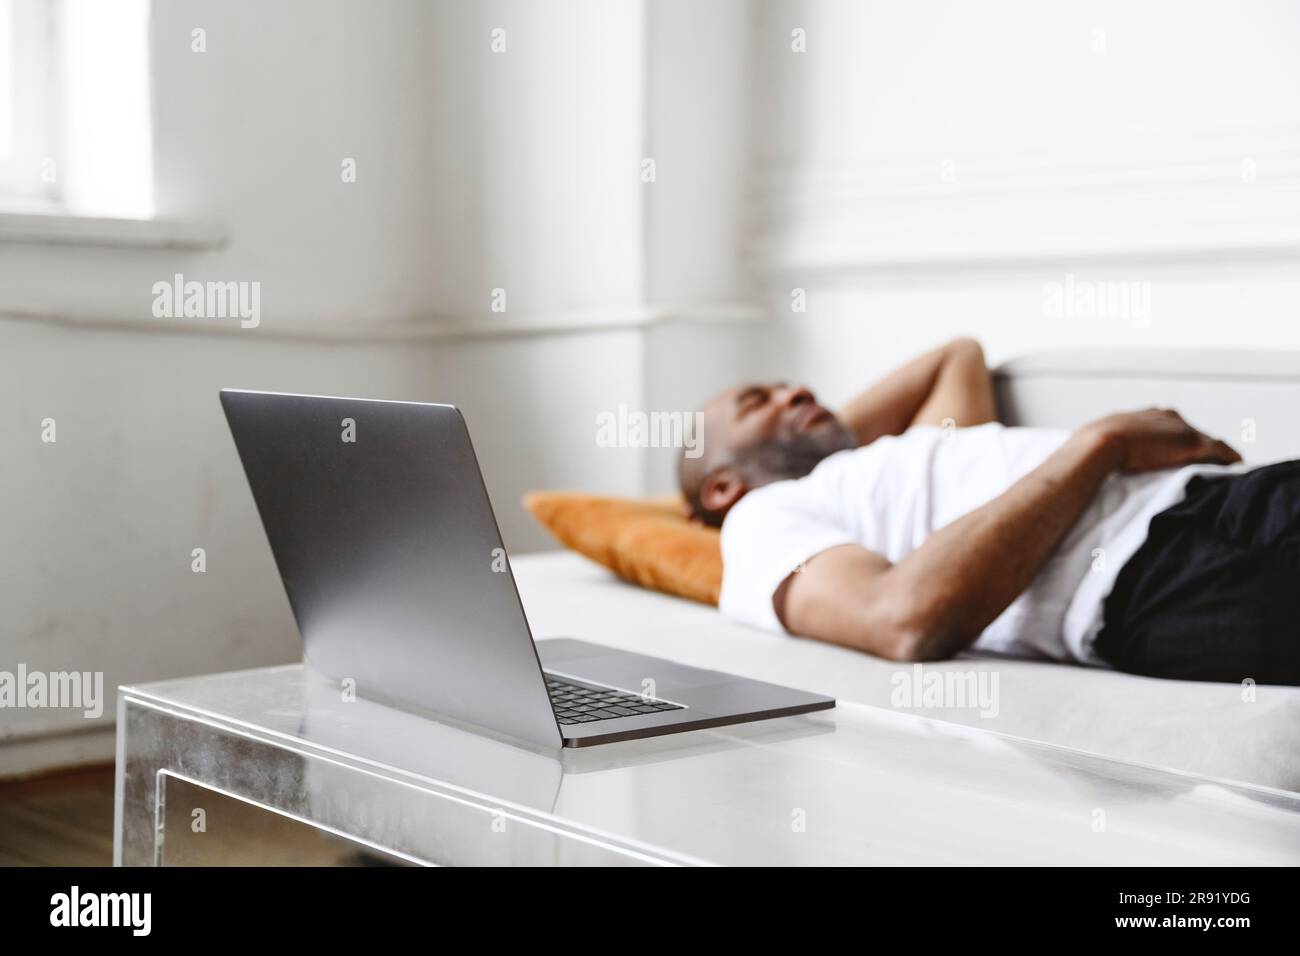 Laptop on table with freelancer lying on sofa in background Stock Photo